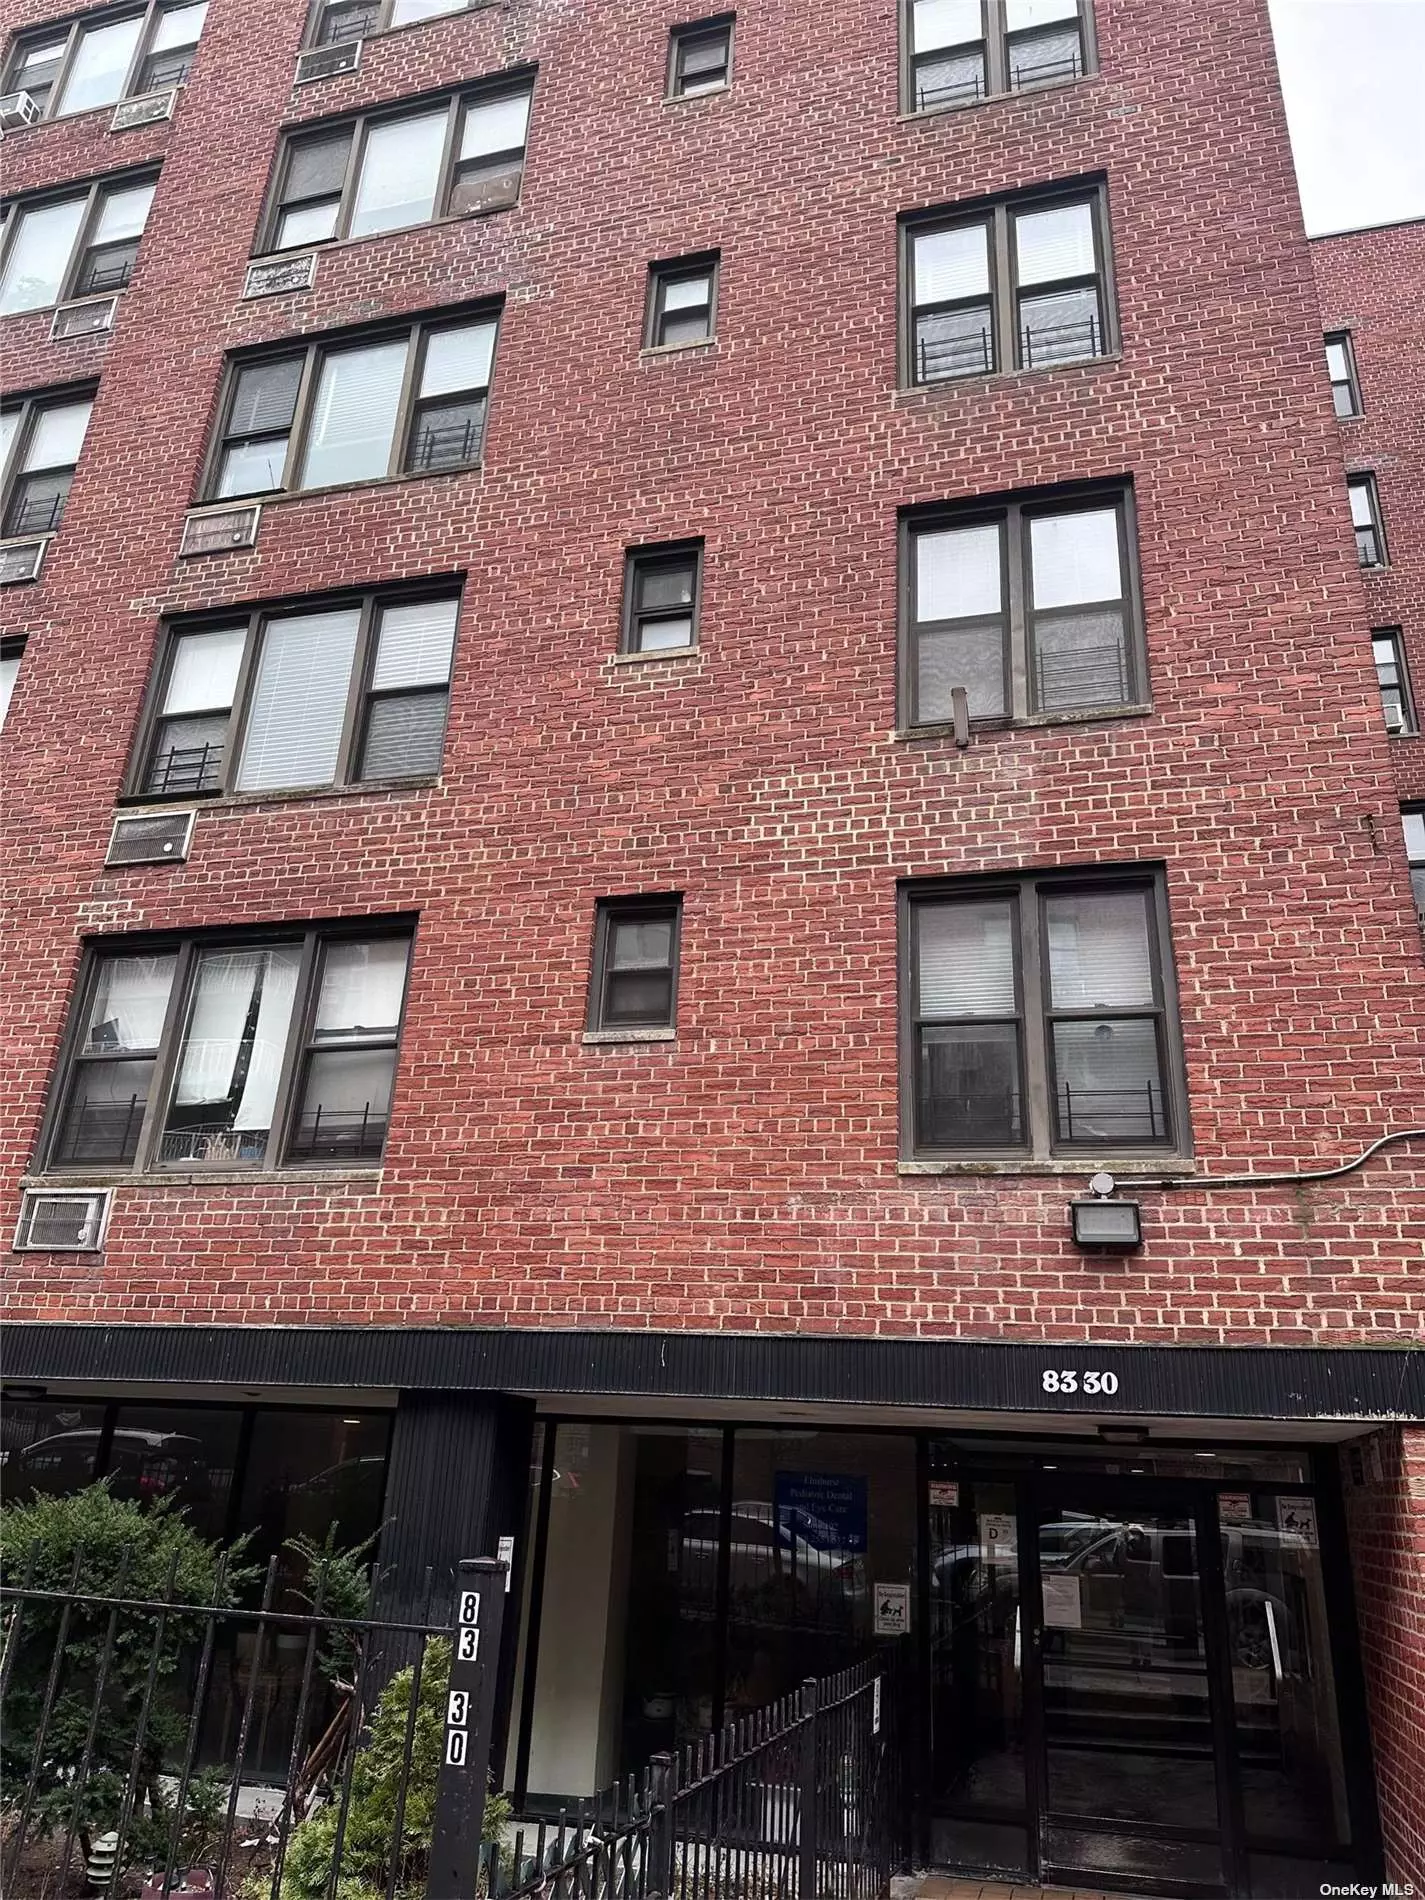 Locate A center of the elmhurst with excellent condition and location, large 2 brs Apt, convert 3 brs Apt. All utilities included except for electeicity. Walk to supermarkets, M, R, 7 train, buese, and queens center mall, etc. Move in condition, Convenient to all!Must see!